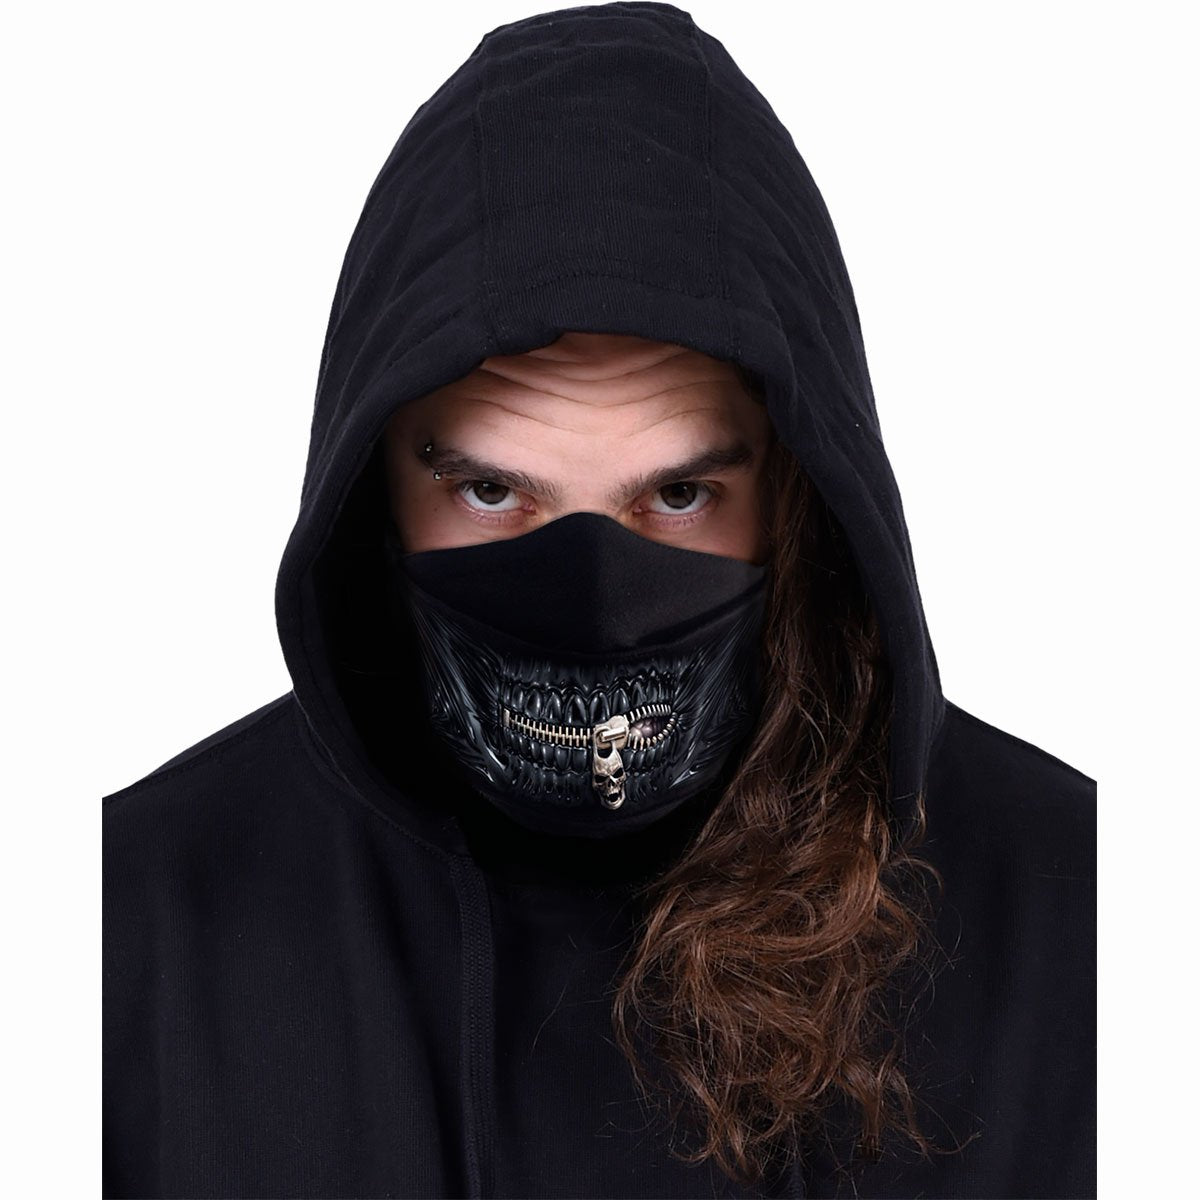 unisex goth style face mask with zipper and black skull